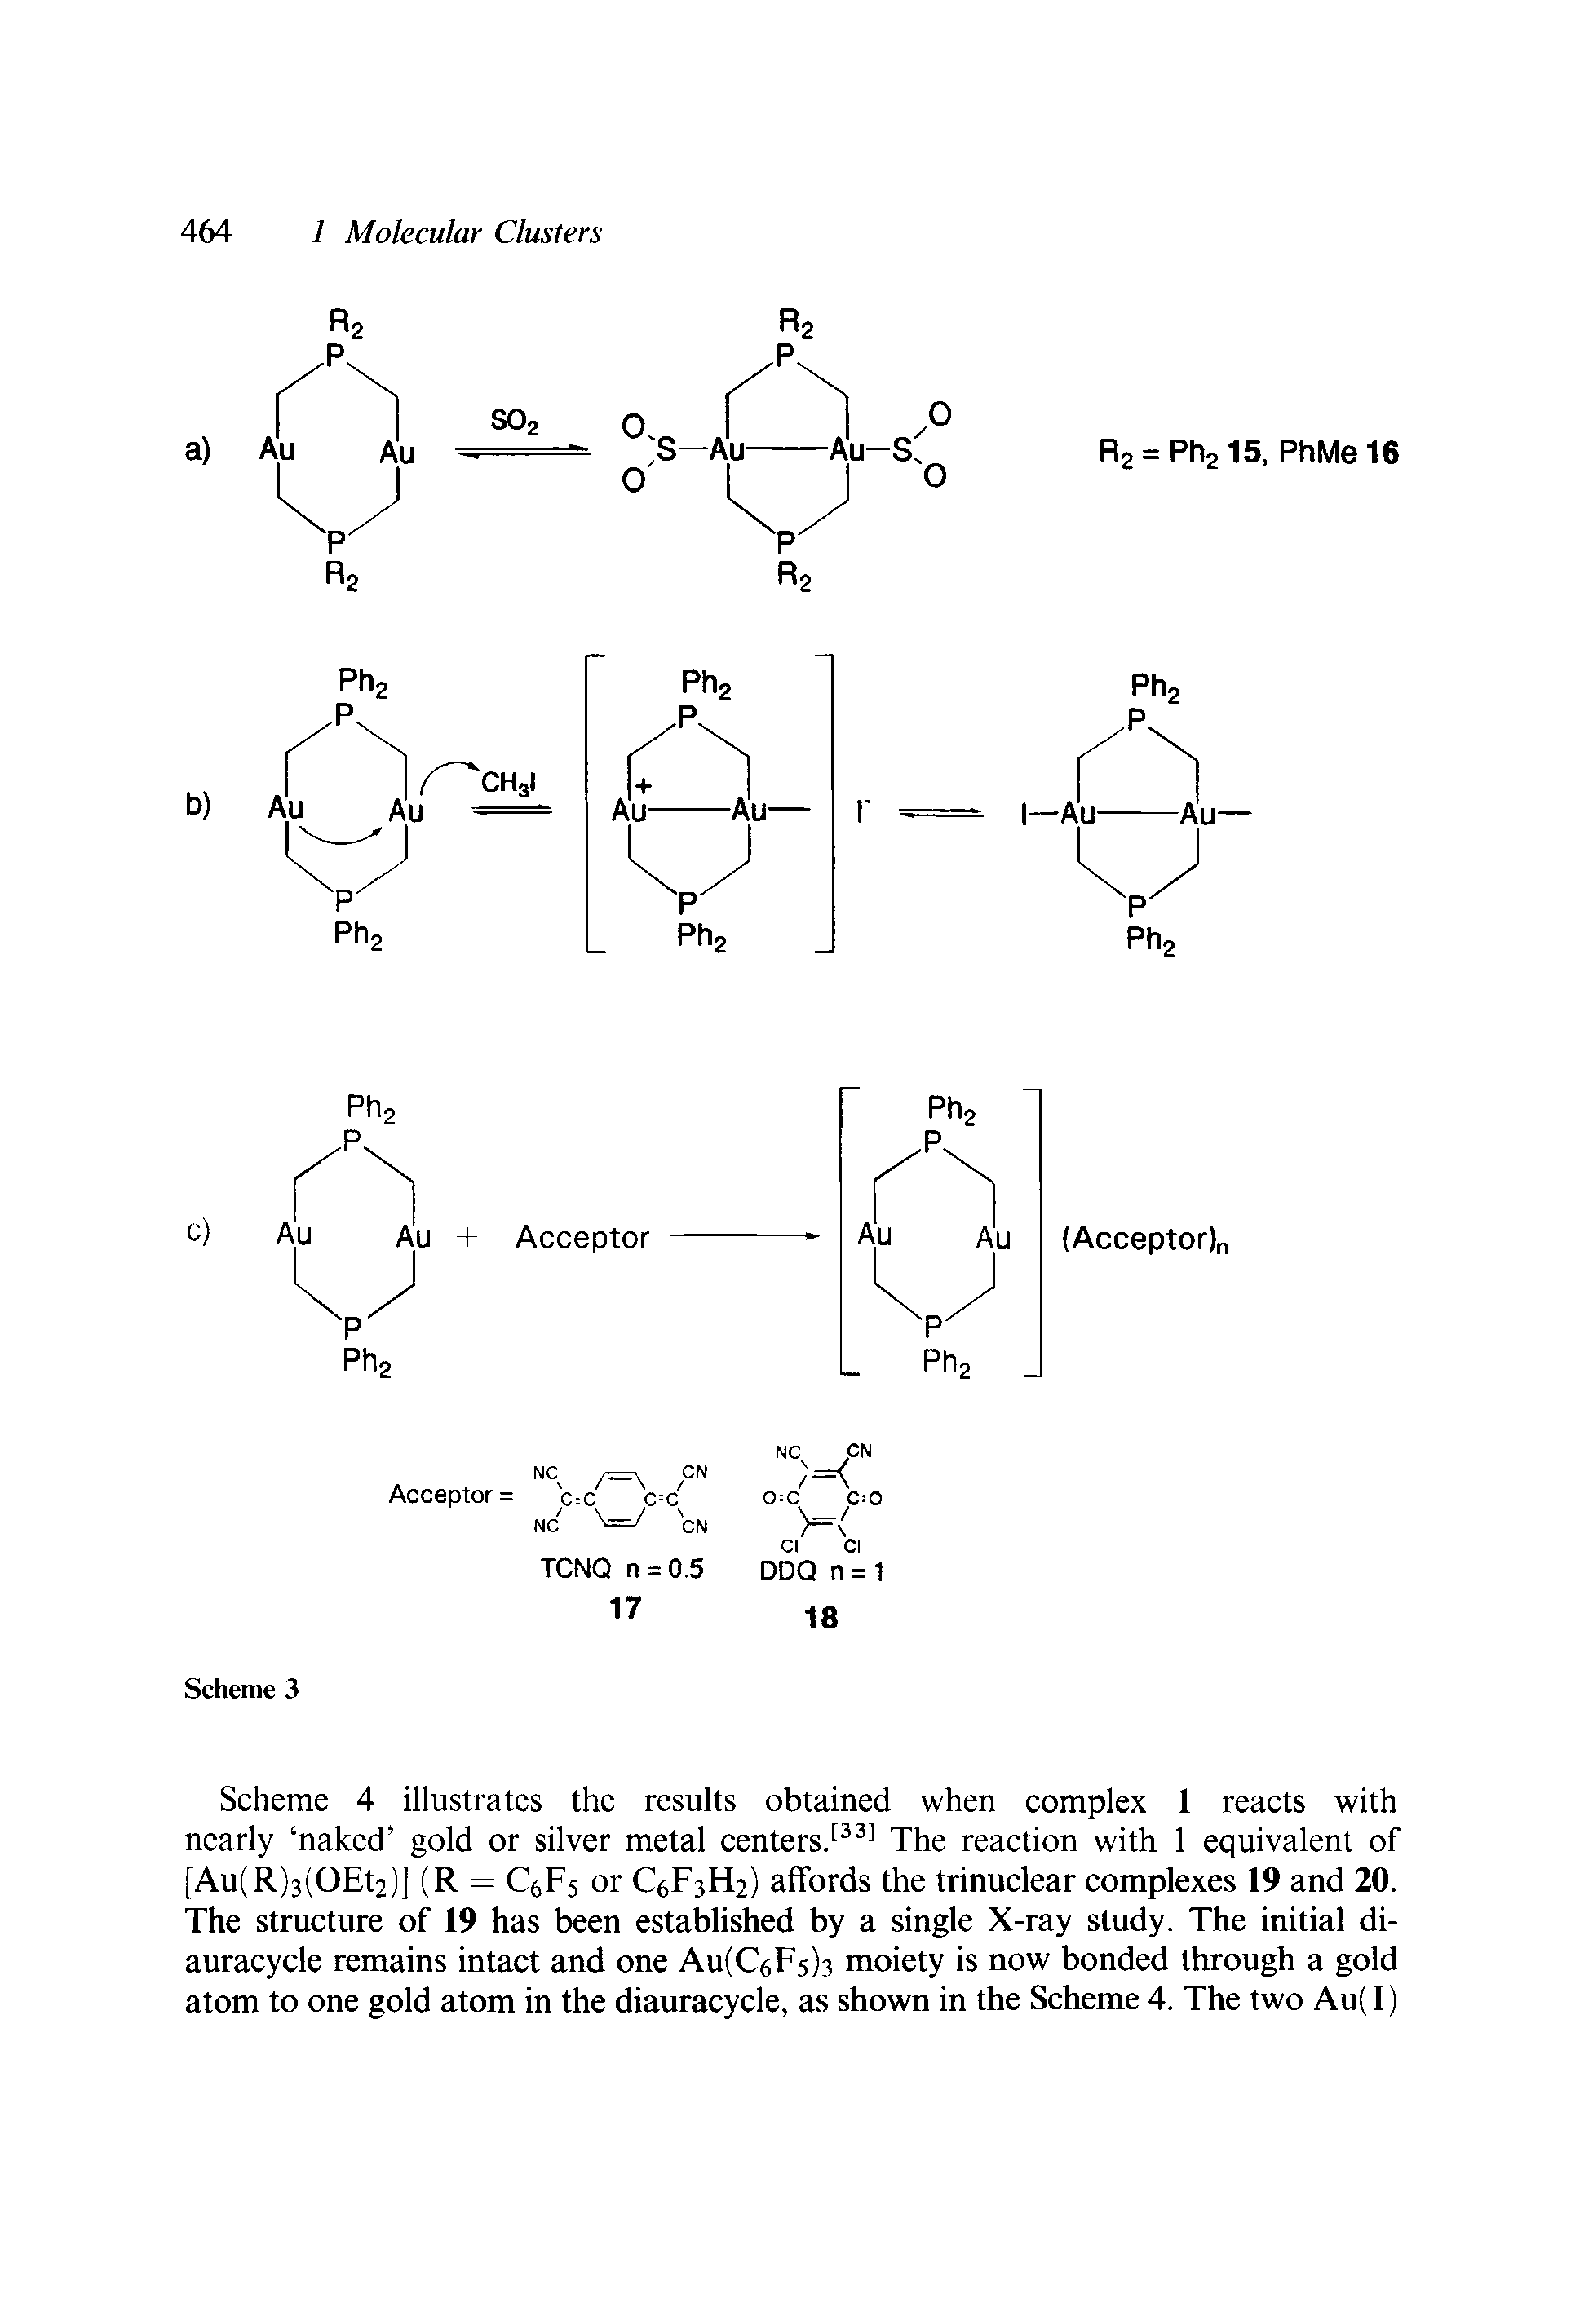 Scheme 4 illustrates the results obtained when complex 1 reacts with nearly naked gold or silver metal centersJ The reaction with 1 equivalent of [Au(R)3(OEt2)] (R = CgFs or C6F3H2) affords the trinuclear complexes 19 and 20. The structure of 19 has been established by a single X-ray study. The initial di-auracycle remains intact and one Au(C6F5)3 moiety is now bonded through a gold atom to one gold atom in the diauracycle, as shown in the Scheme 4. The two Au( I)...